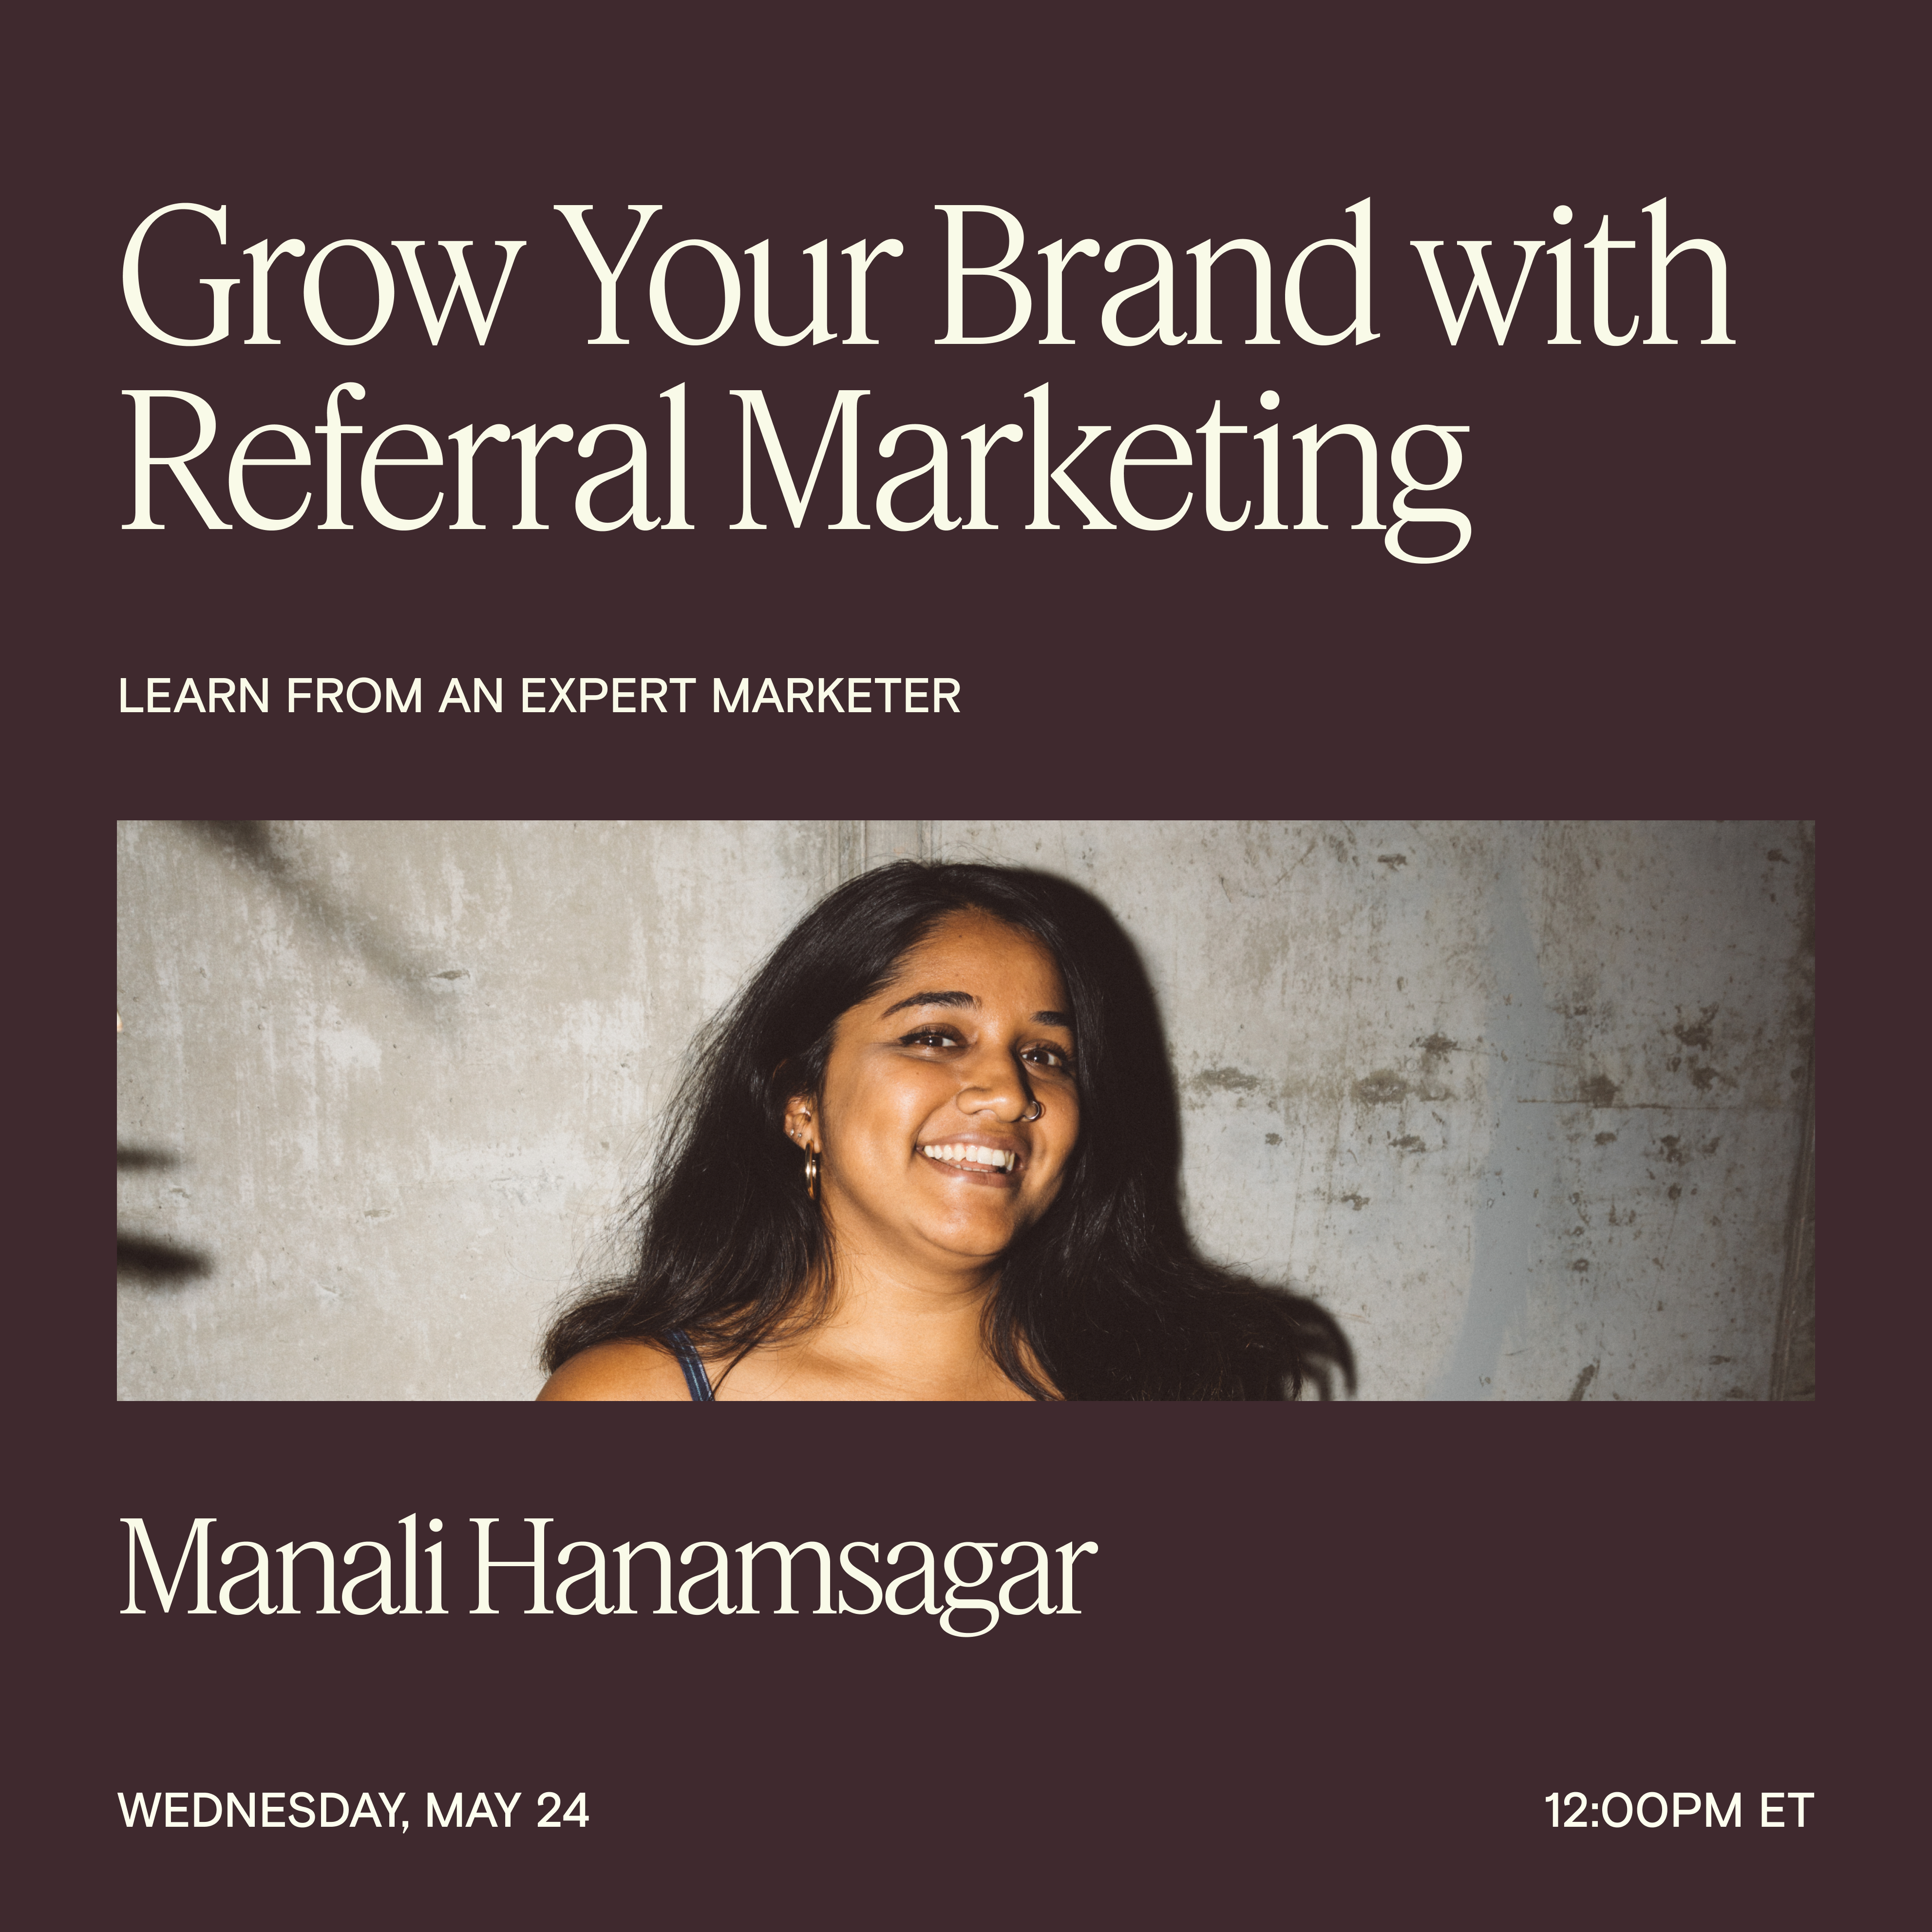 How to grow your brand with Referral Marketing